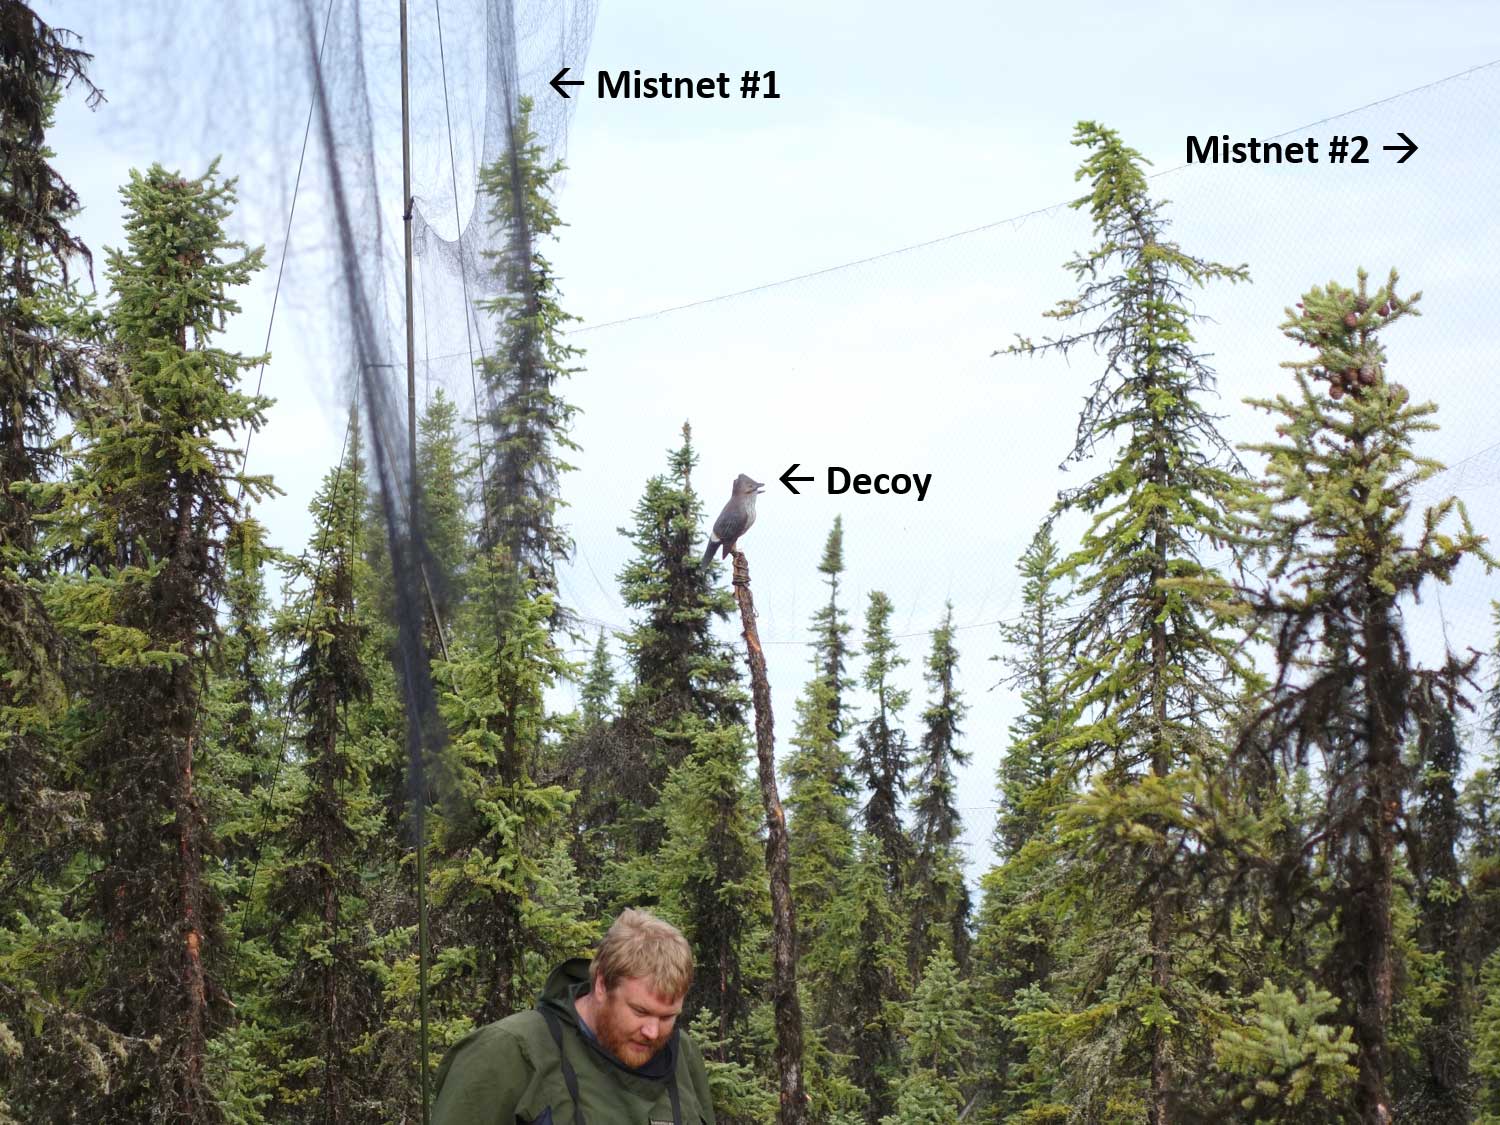 After an OSFL territory with a singing bird is located, we set up several mist nets, often in a V-shaped pattern.  Mist nets are very tall, attached to poles and vertical to the ground.  Mistnets are made of fine material similar to a hair net and are especially made for trained scientists to safely capture songbirds.  We also set up a bird decoy (center) attached to an upright stick and play bird song with a device hidden in the brush directly below the decoy.  The territory owner views the decoy as a singing intruder!  When the territorial bird comes close to investigate, it is safely captured in a mistnet.  In 10-20 minutes, the bird is banded, measured, and has a small tag attached to track its migratory route, before it is released.  Photo: E. Allaby, ADFG - Alaska Department of Fish and Game (ADFG)